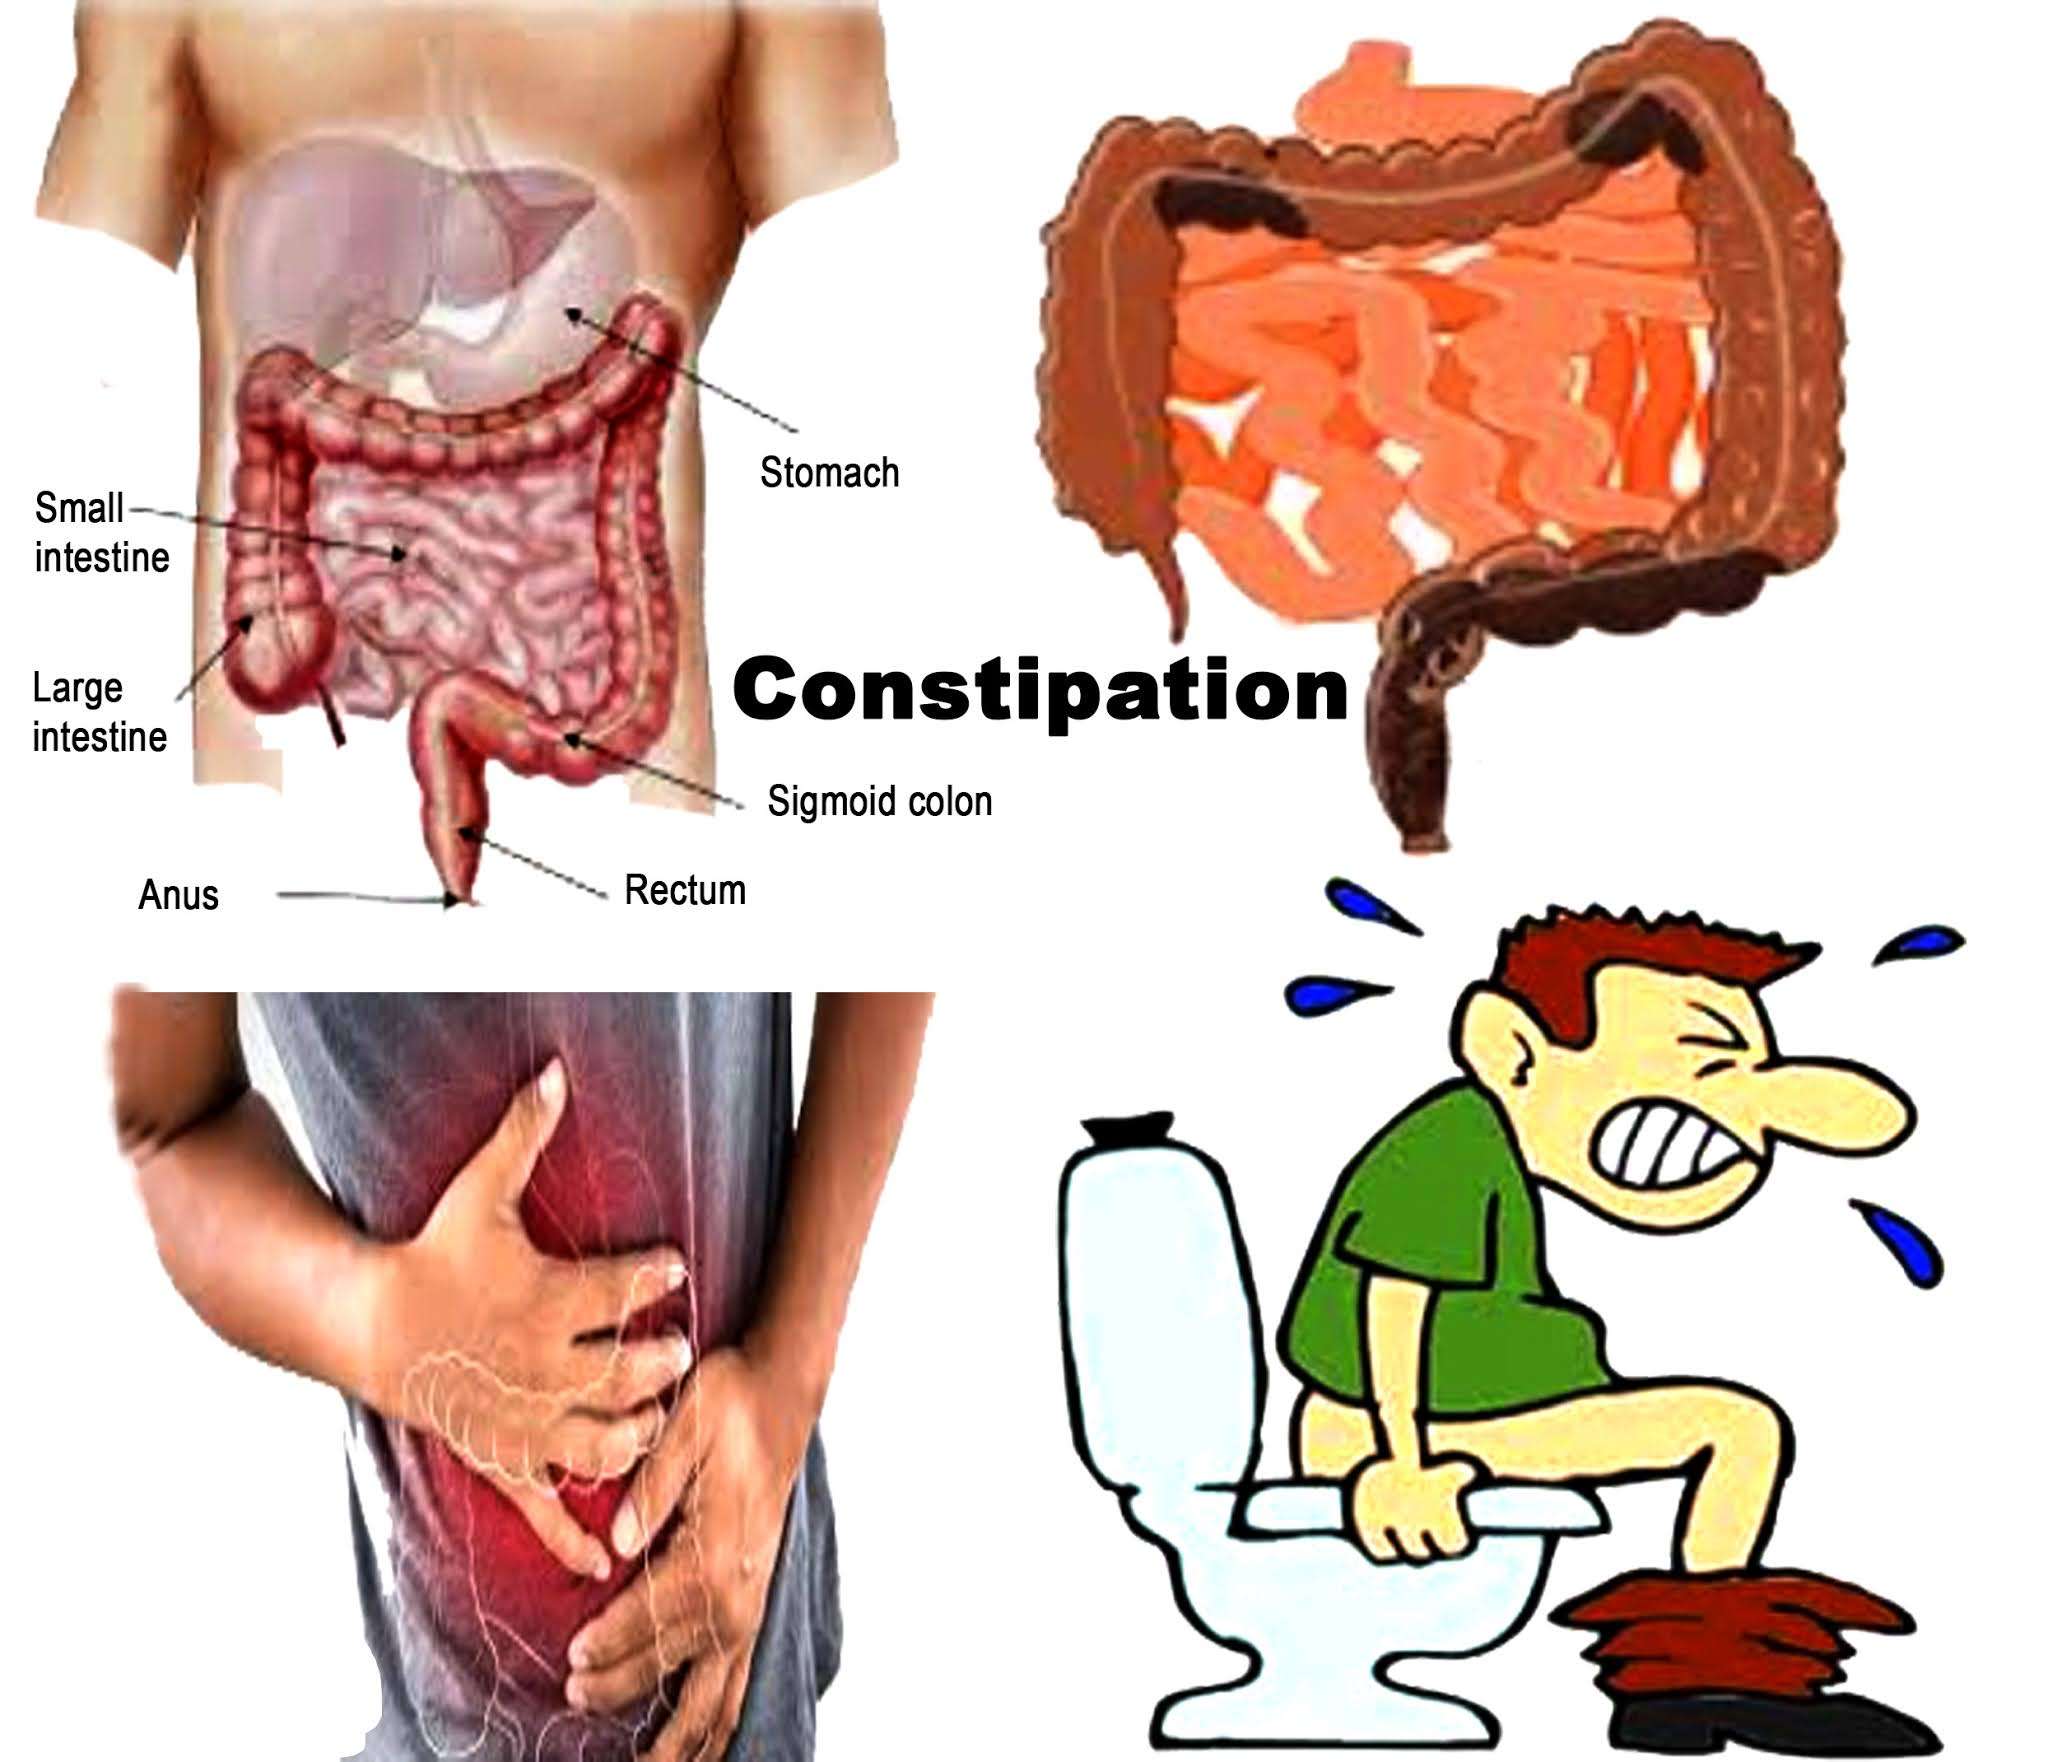 Constipation: Symptoms, Causes, Prevention, and Treatment.